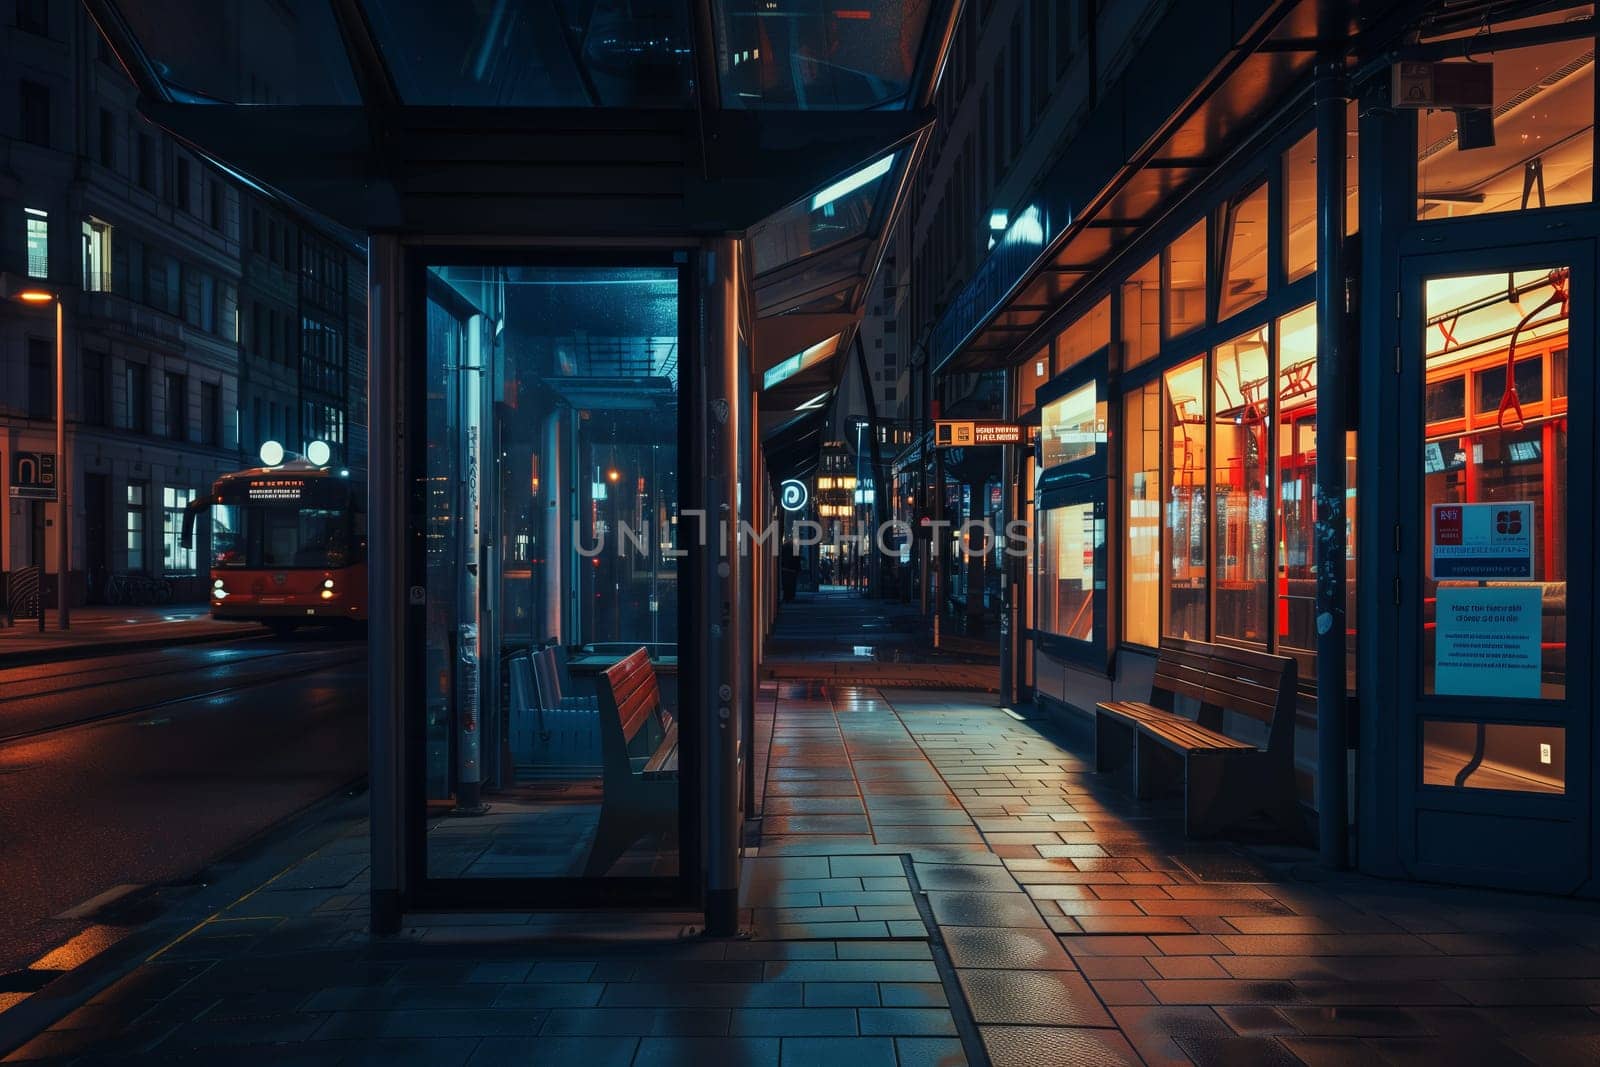 a bus stop at night with a phone booth in the middle of the street by richwolf